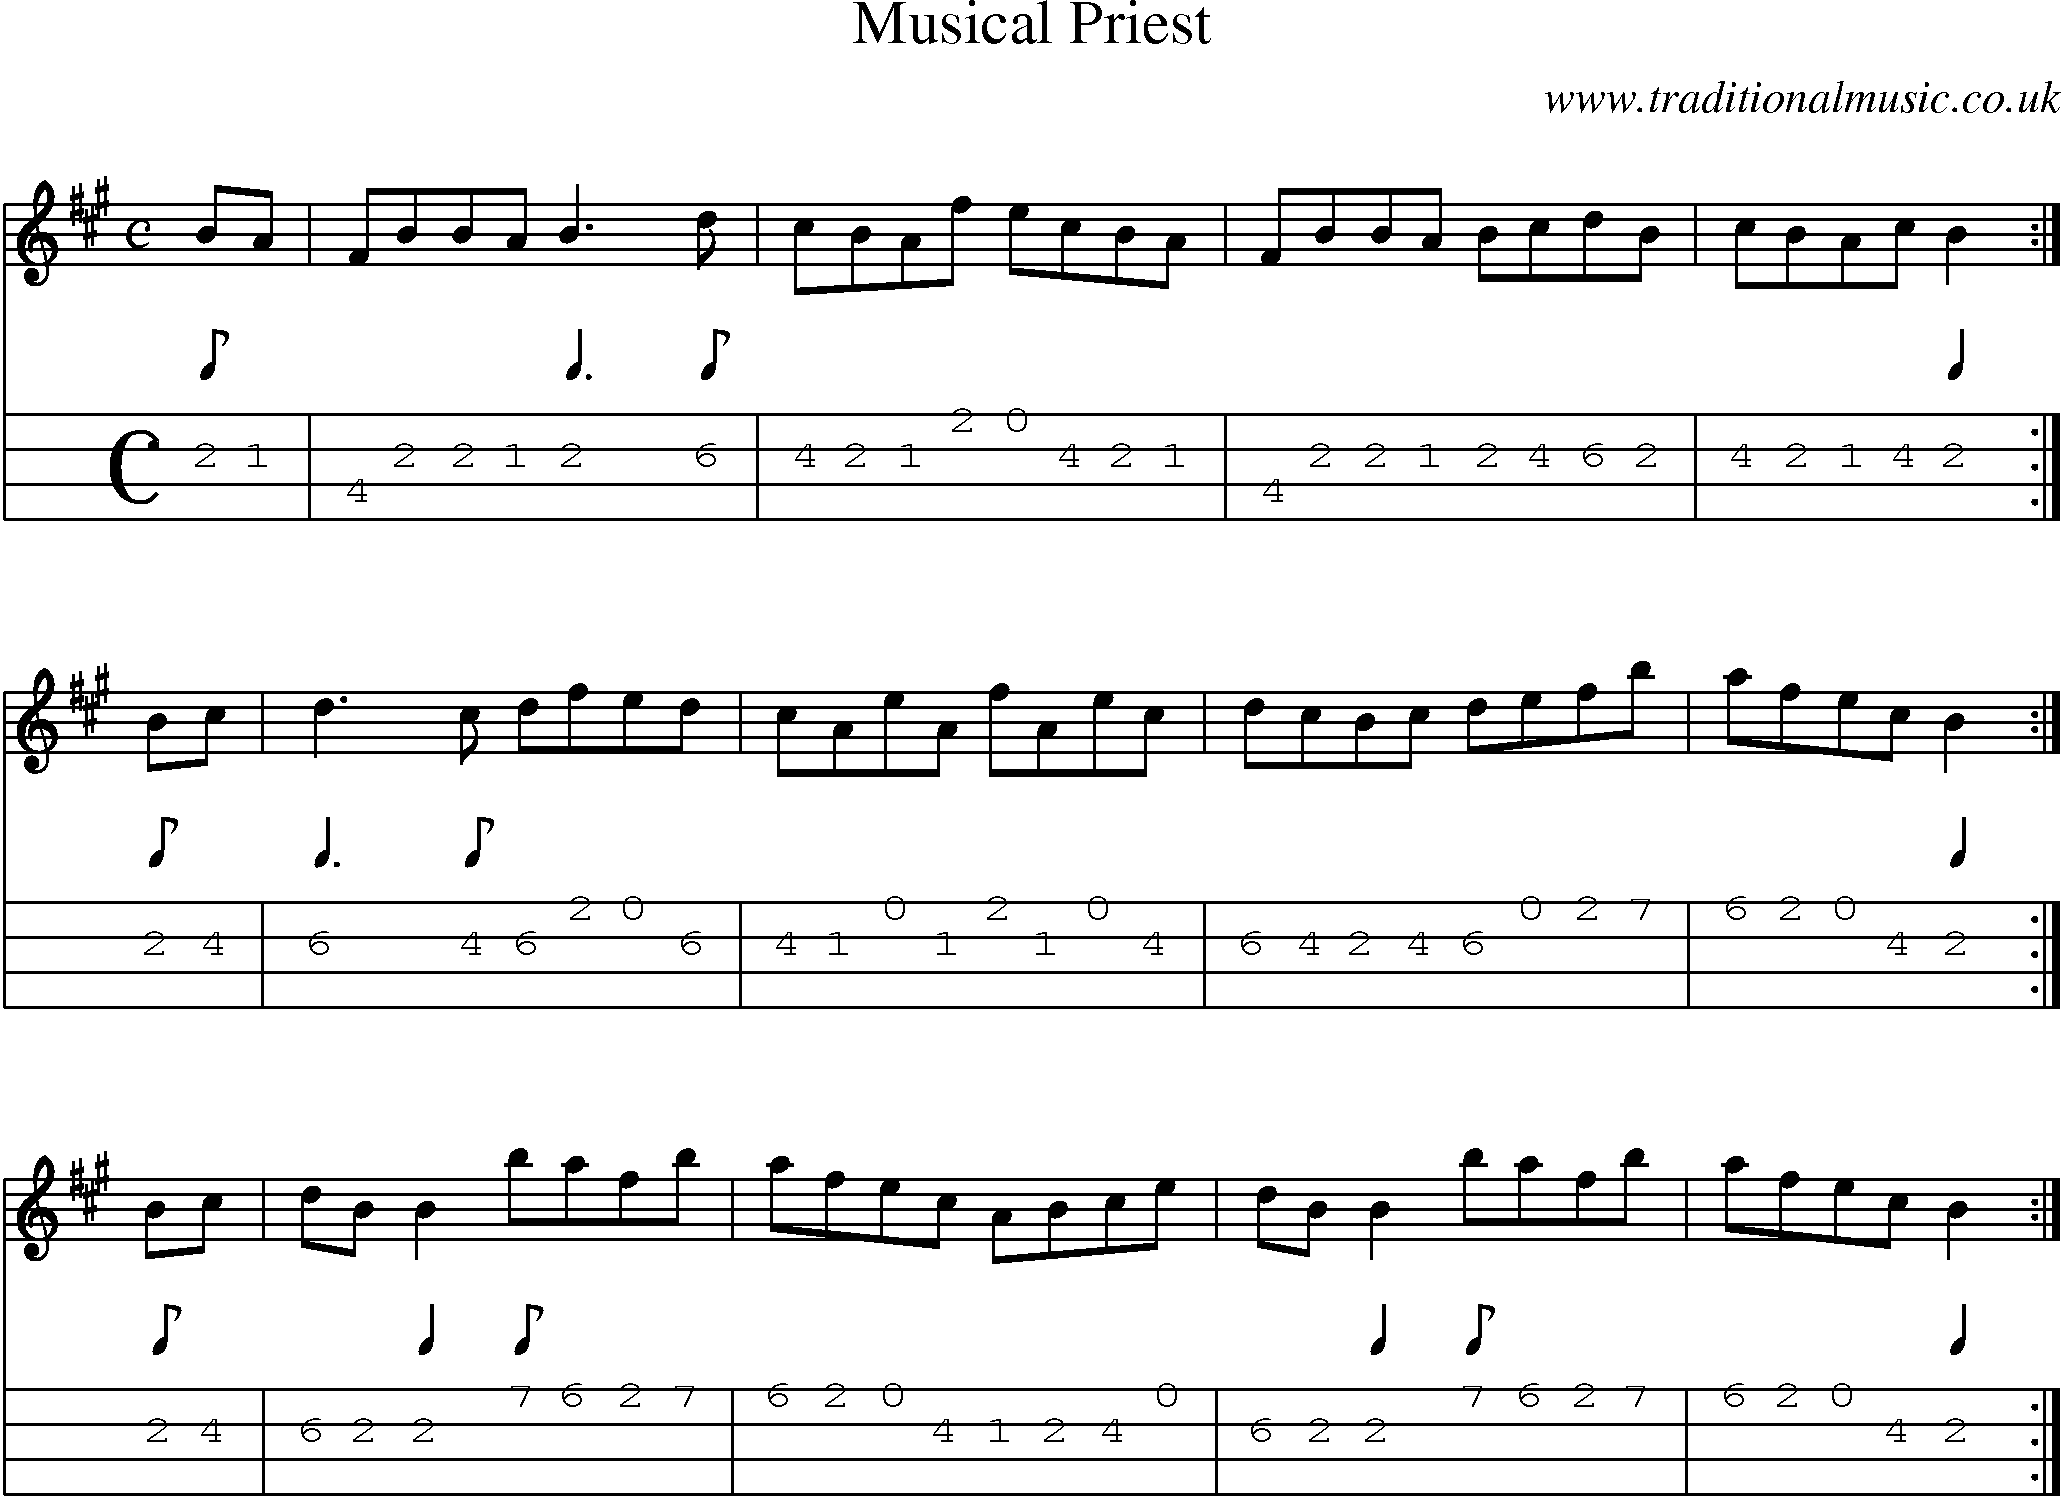 Music Score and Mandolin Tabs for Musical Priest